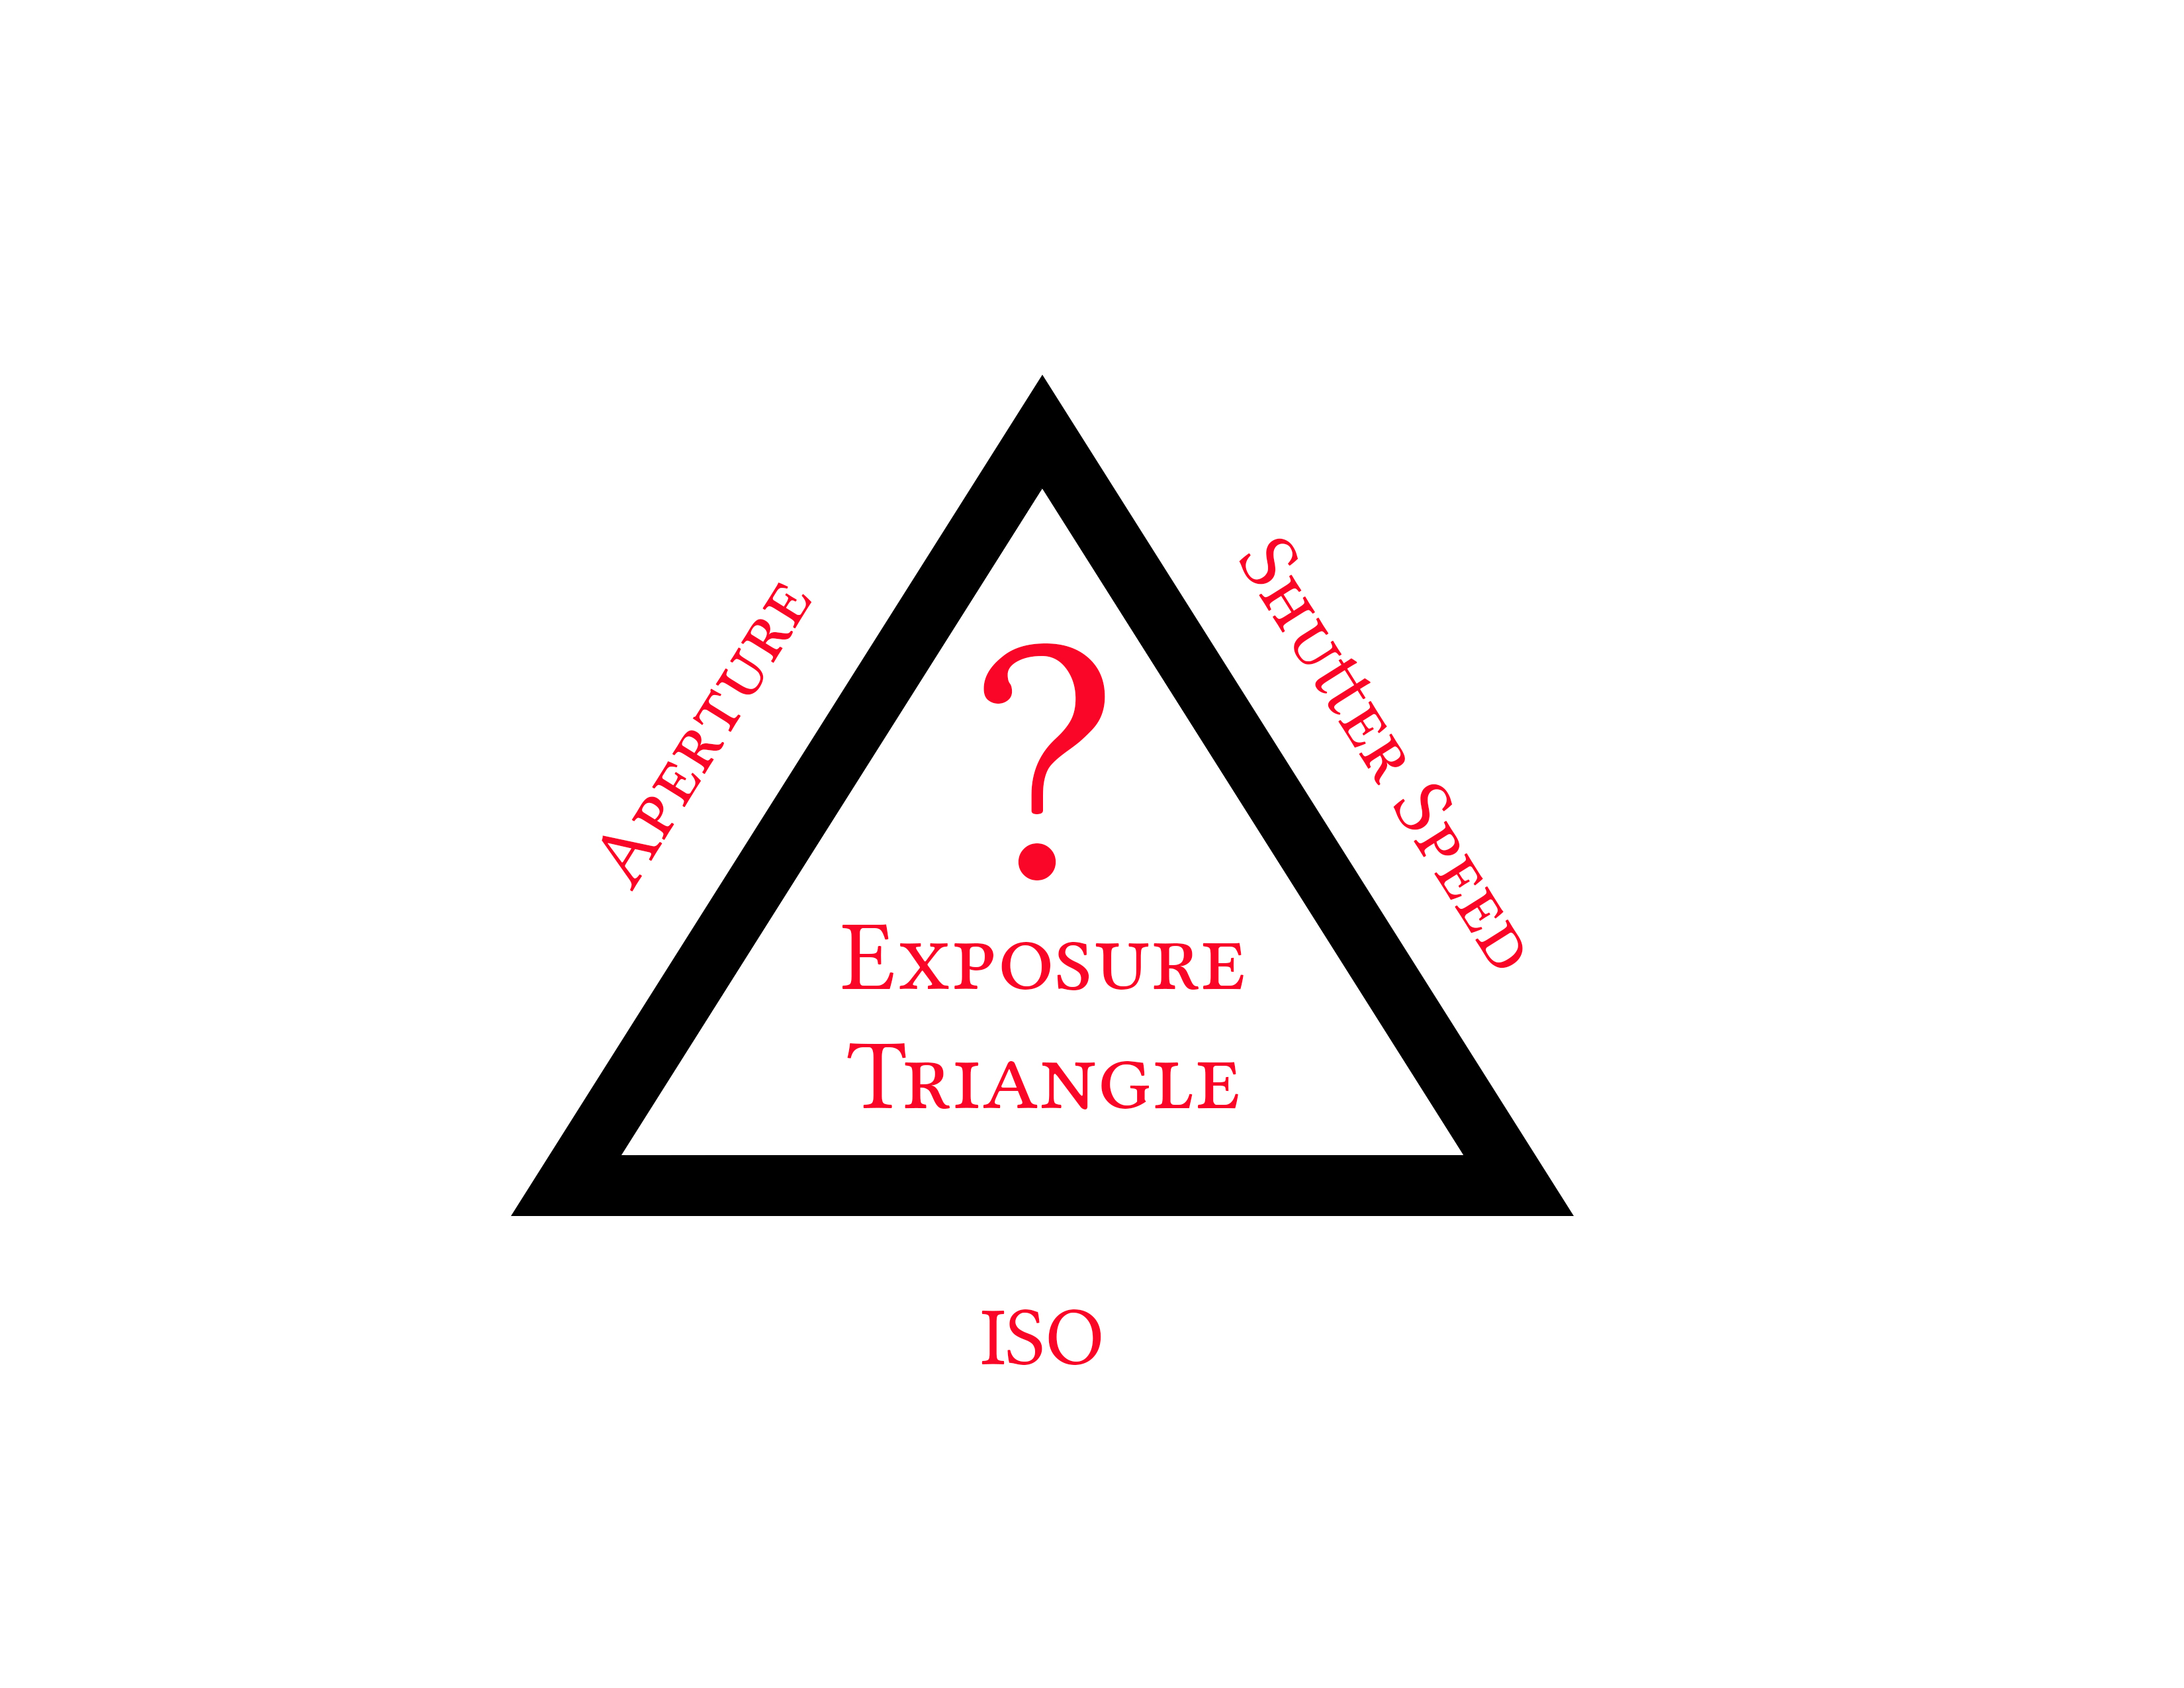 Exposure Triangle - What is it All About